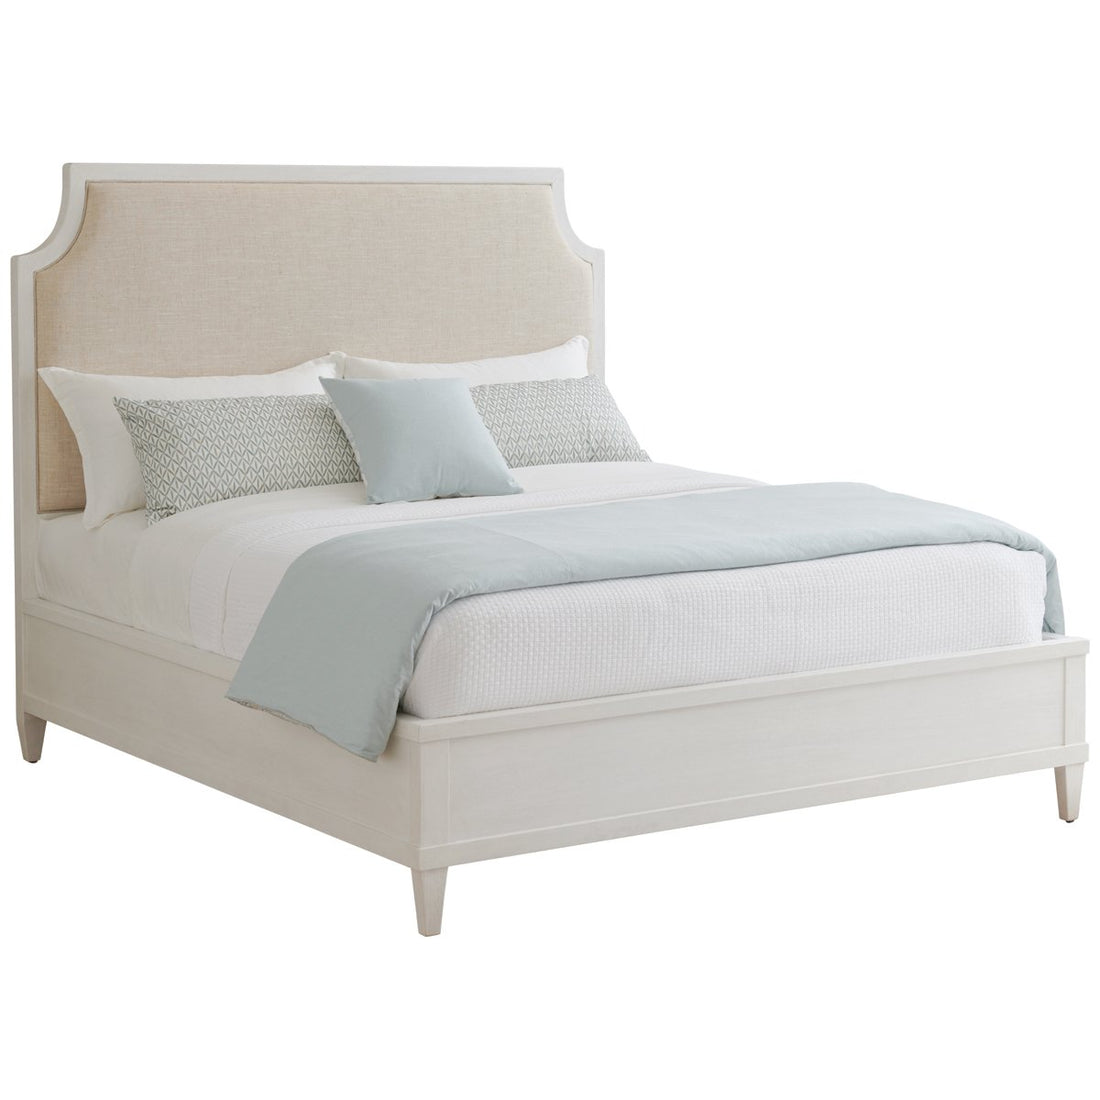 Tommy Bahama Ocean Breeze Belle Isle Upholstered Bed